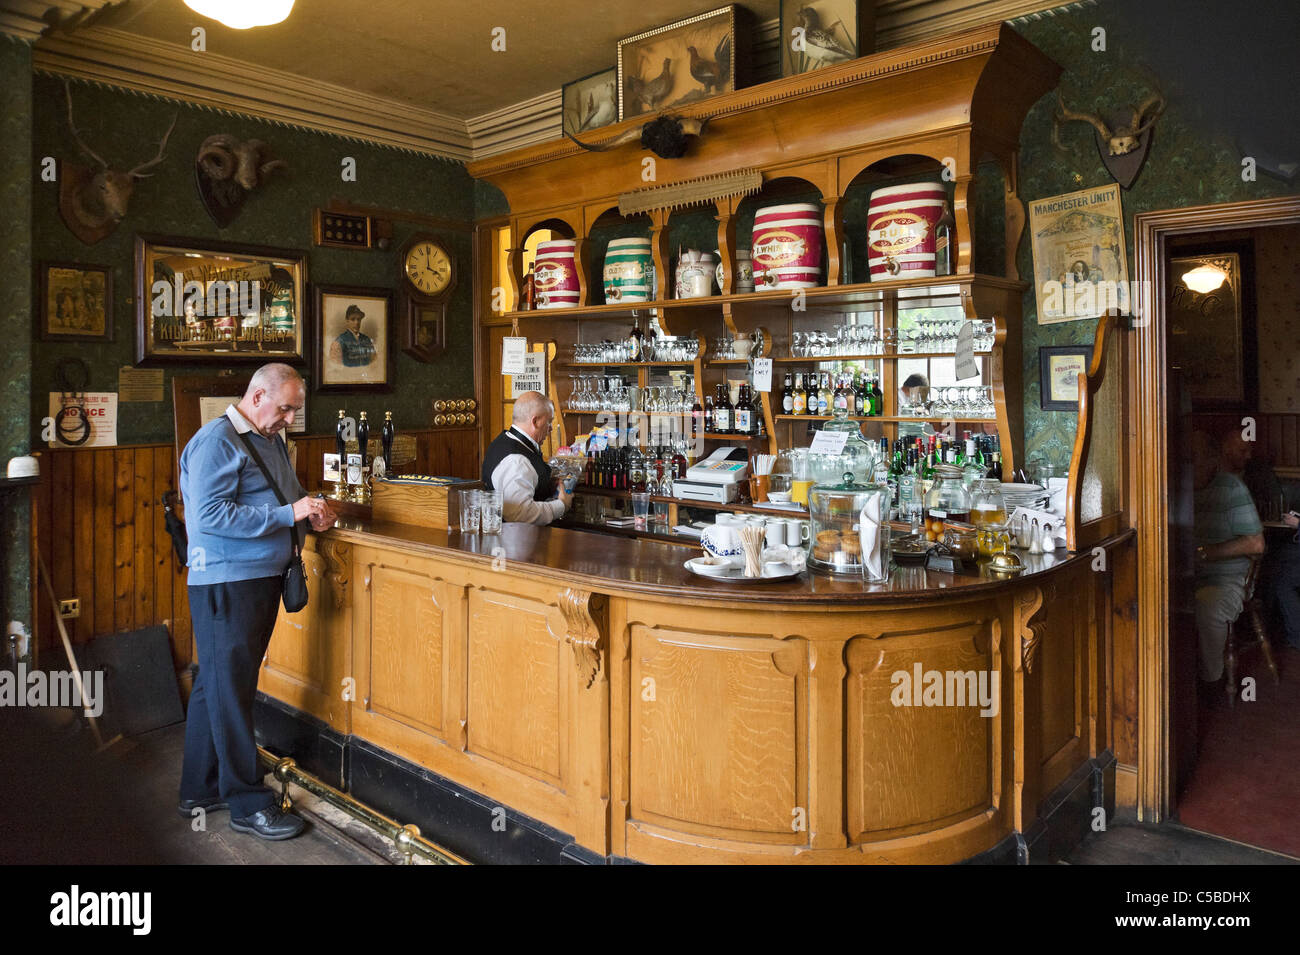 Interior of the Sun Inn pub on the High Street in The Town, Beamish Open Air Museum, County Durham, North East England, UK Stock Photo